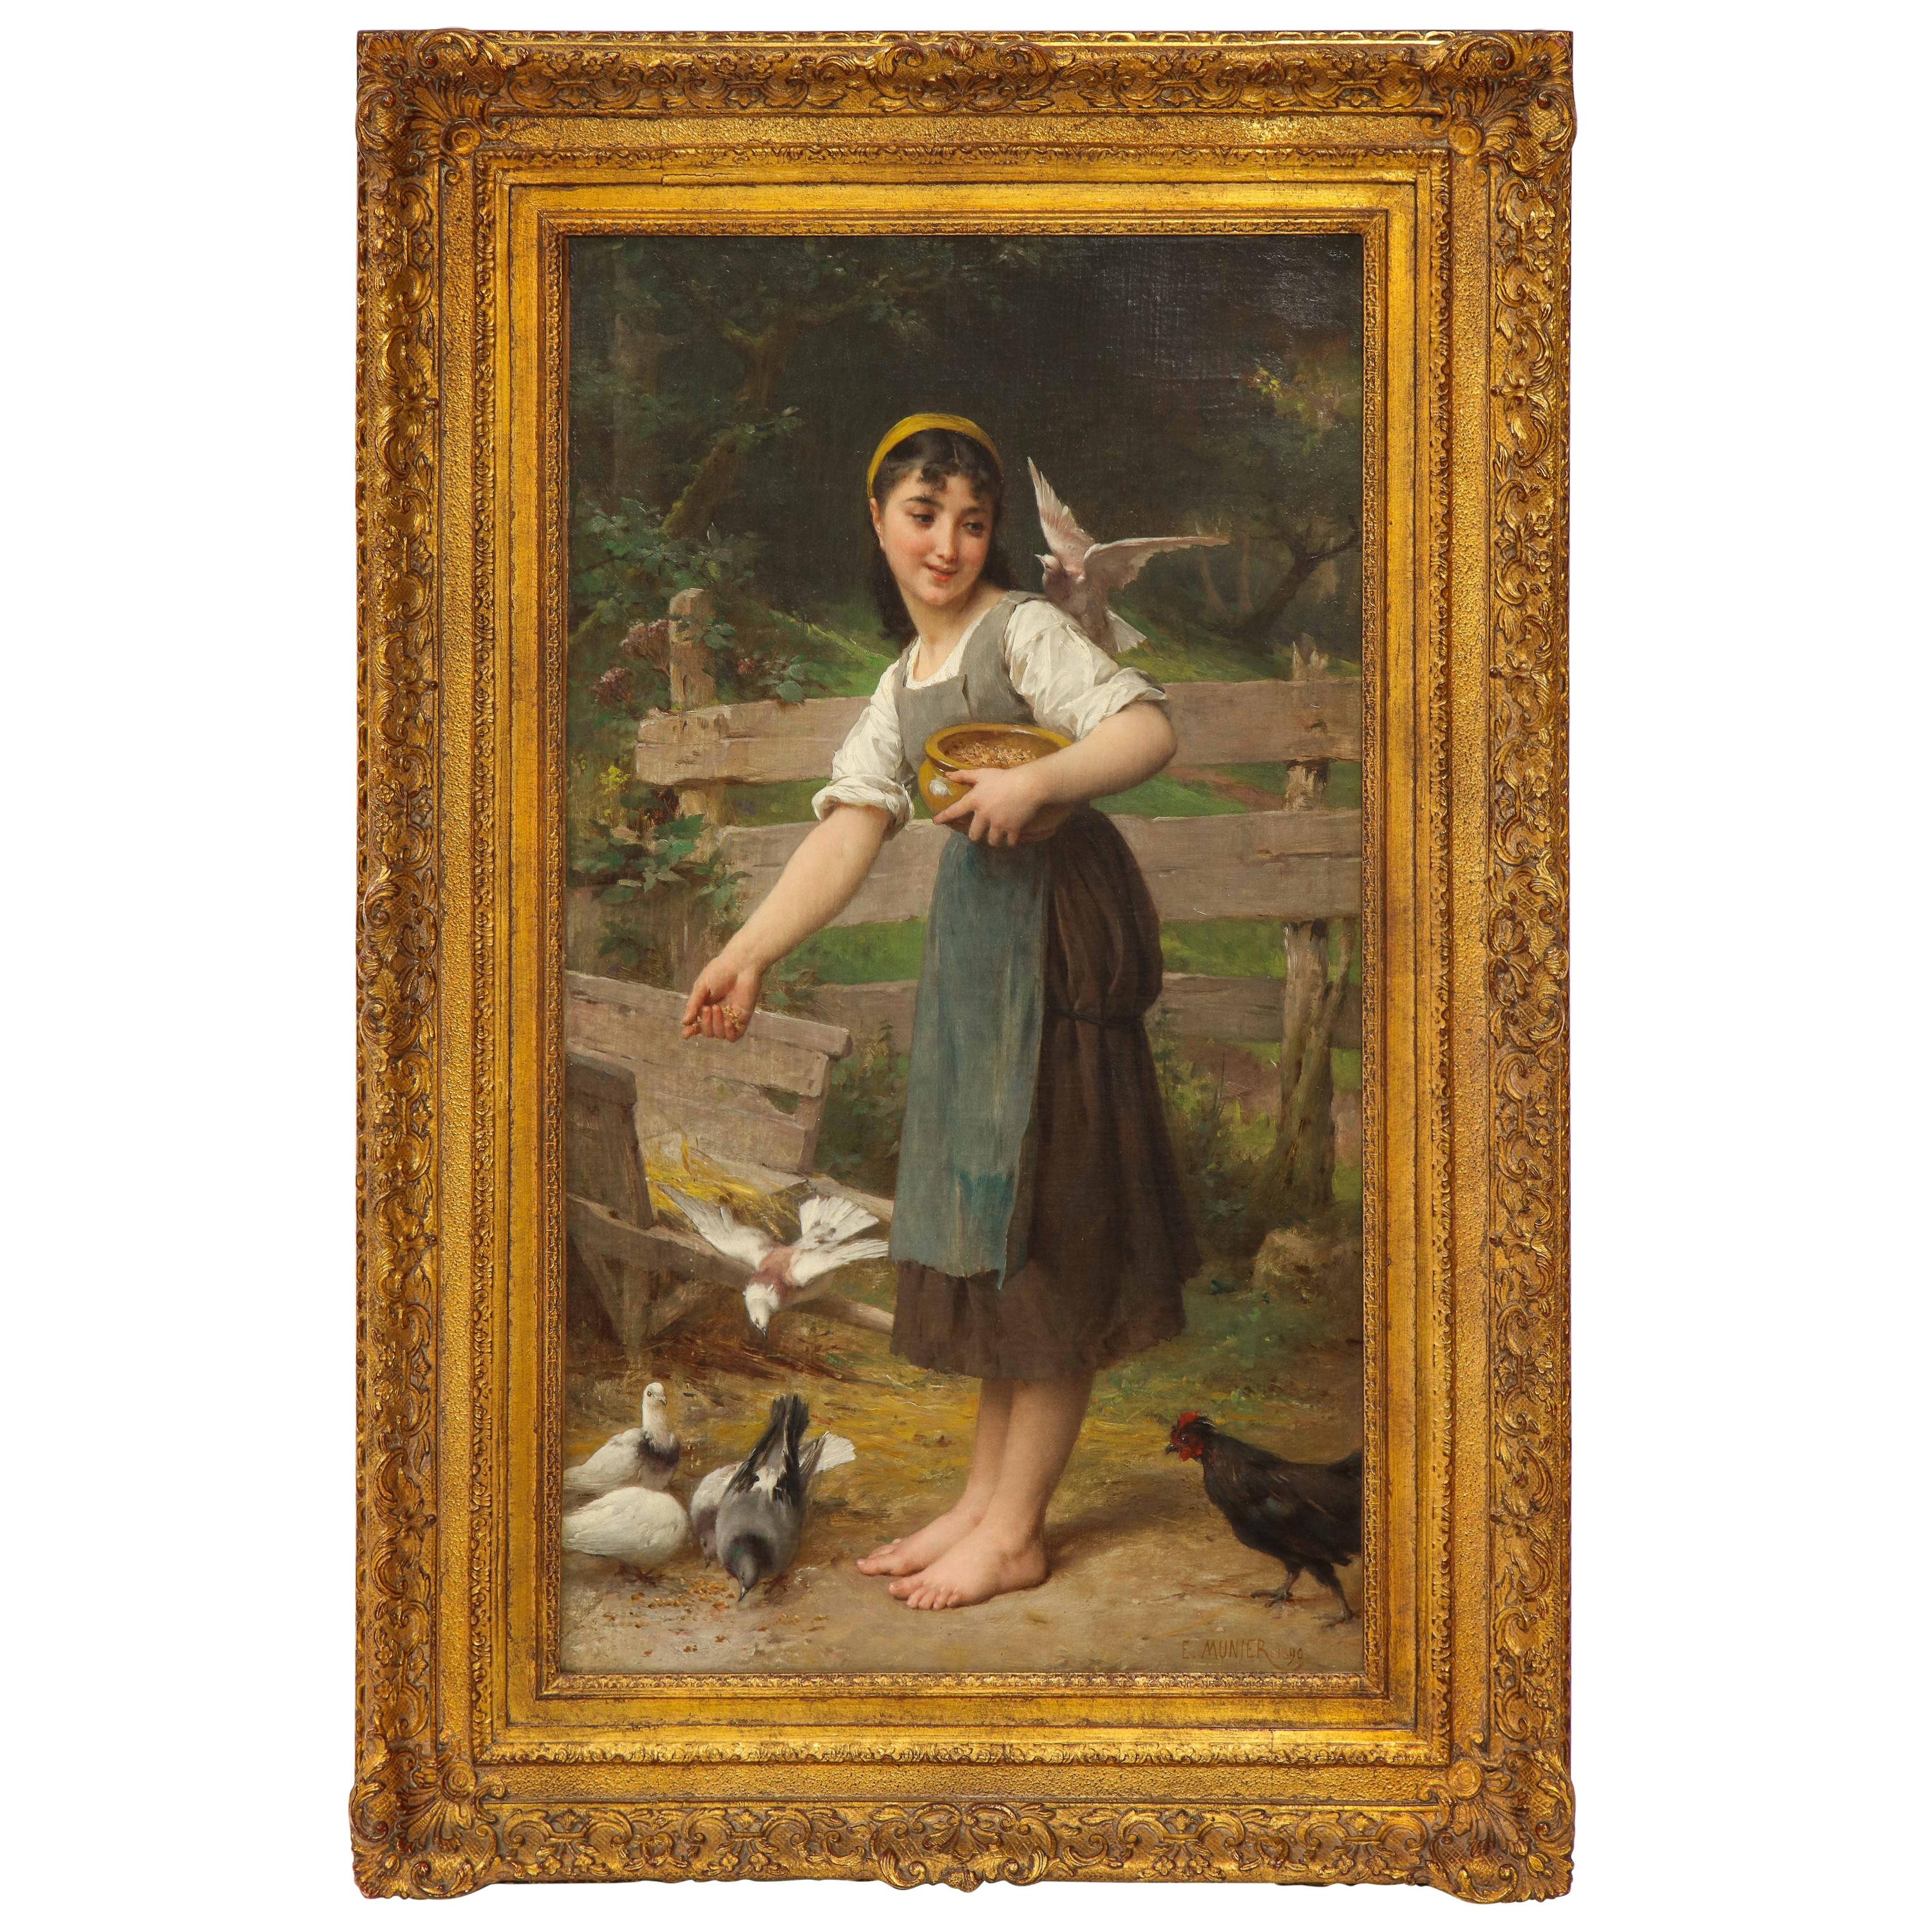 Exceptional French Oil on Canvas, "Feeding the Doves", Signed by E. Munier